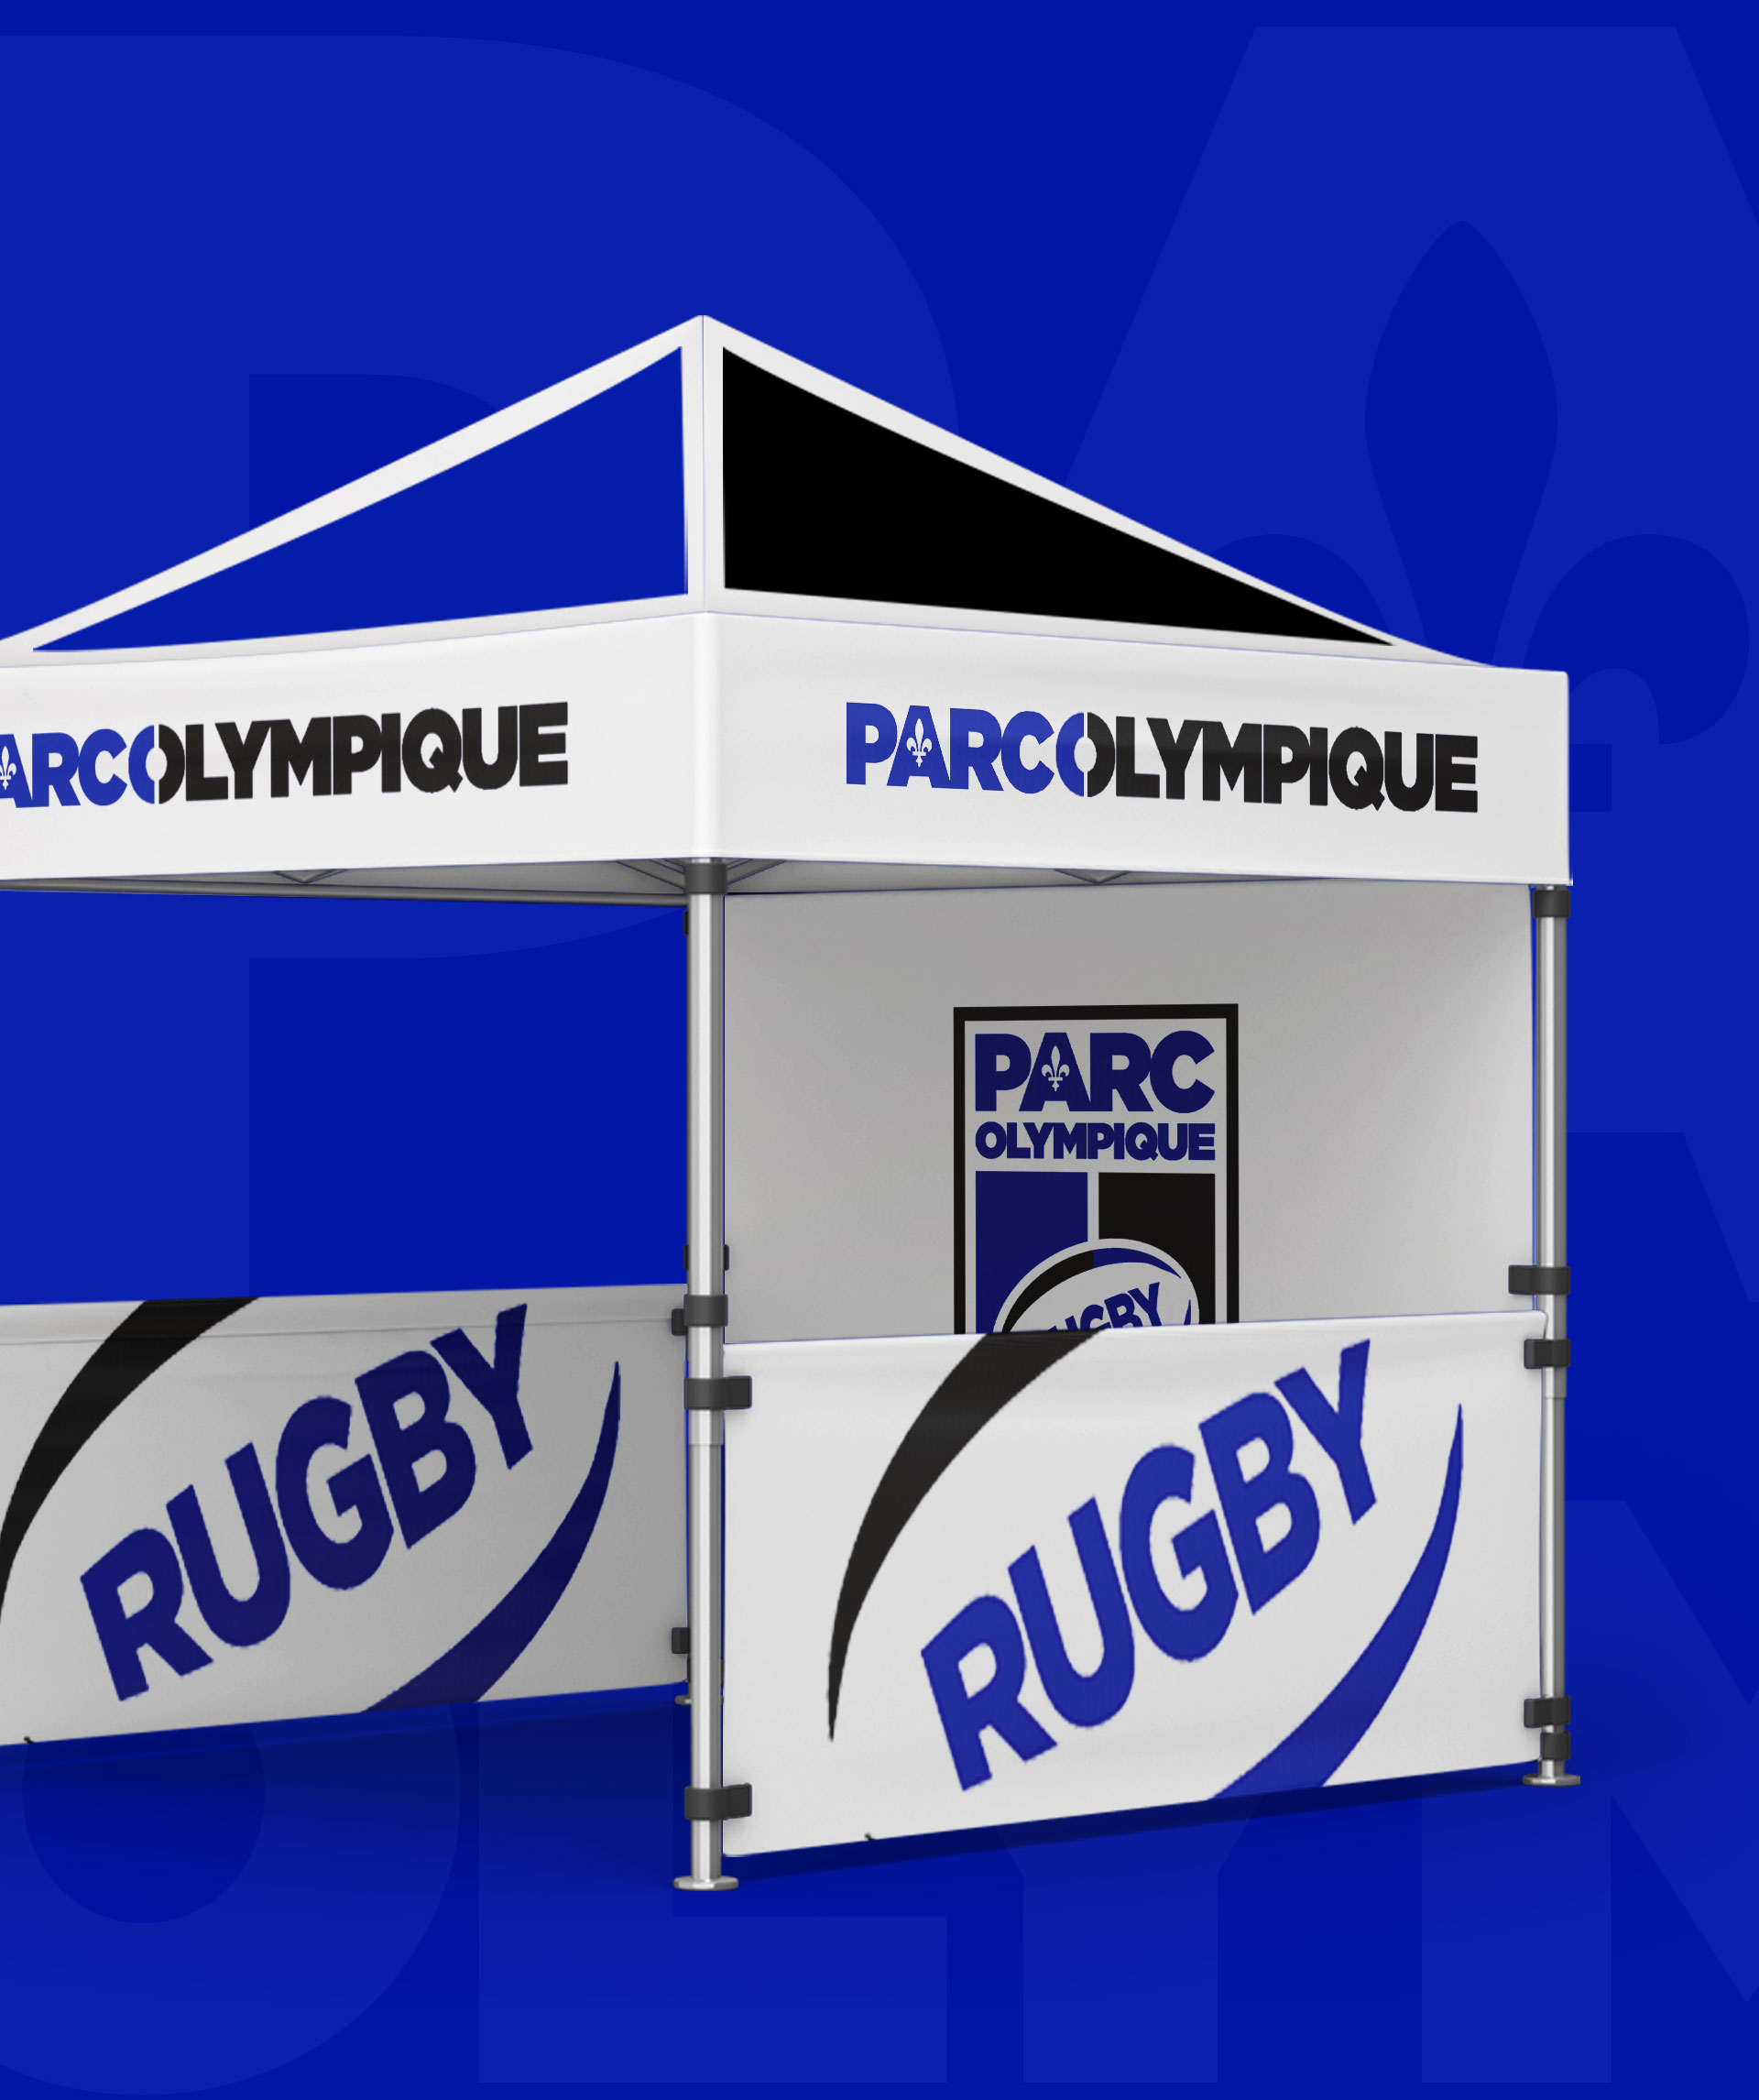 Parc Olympique Rugby